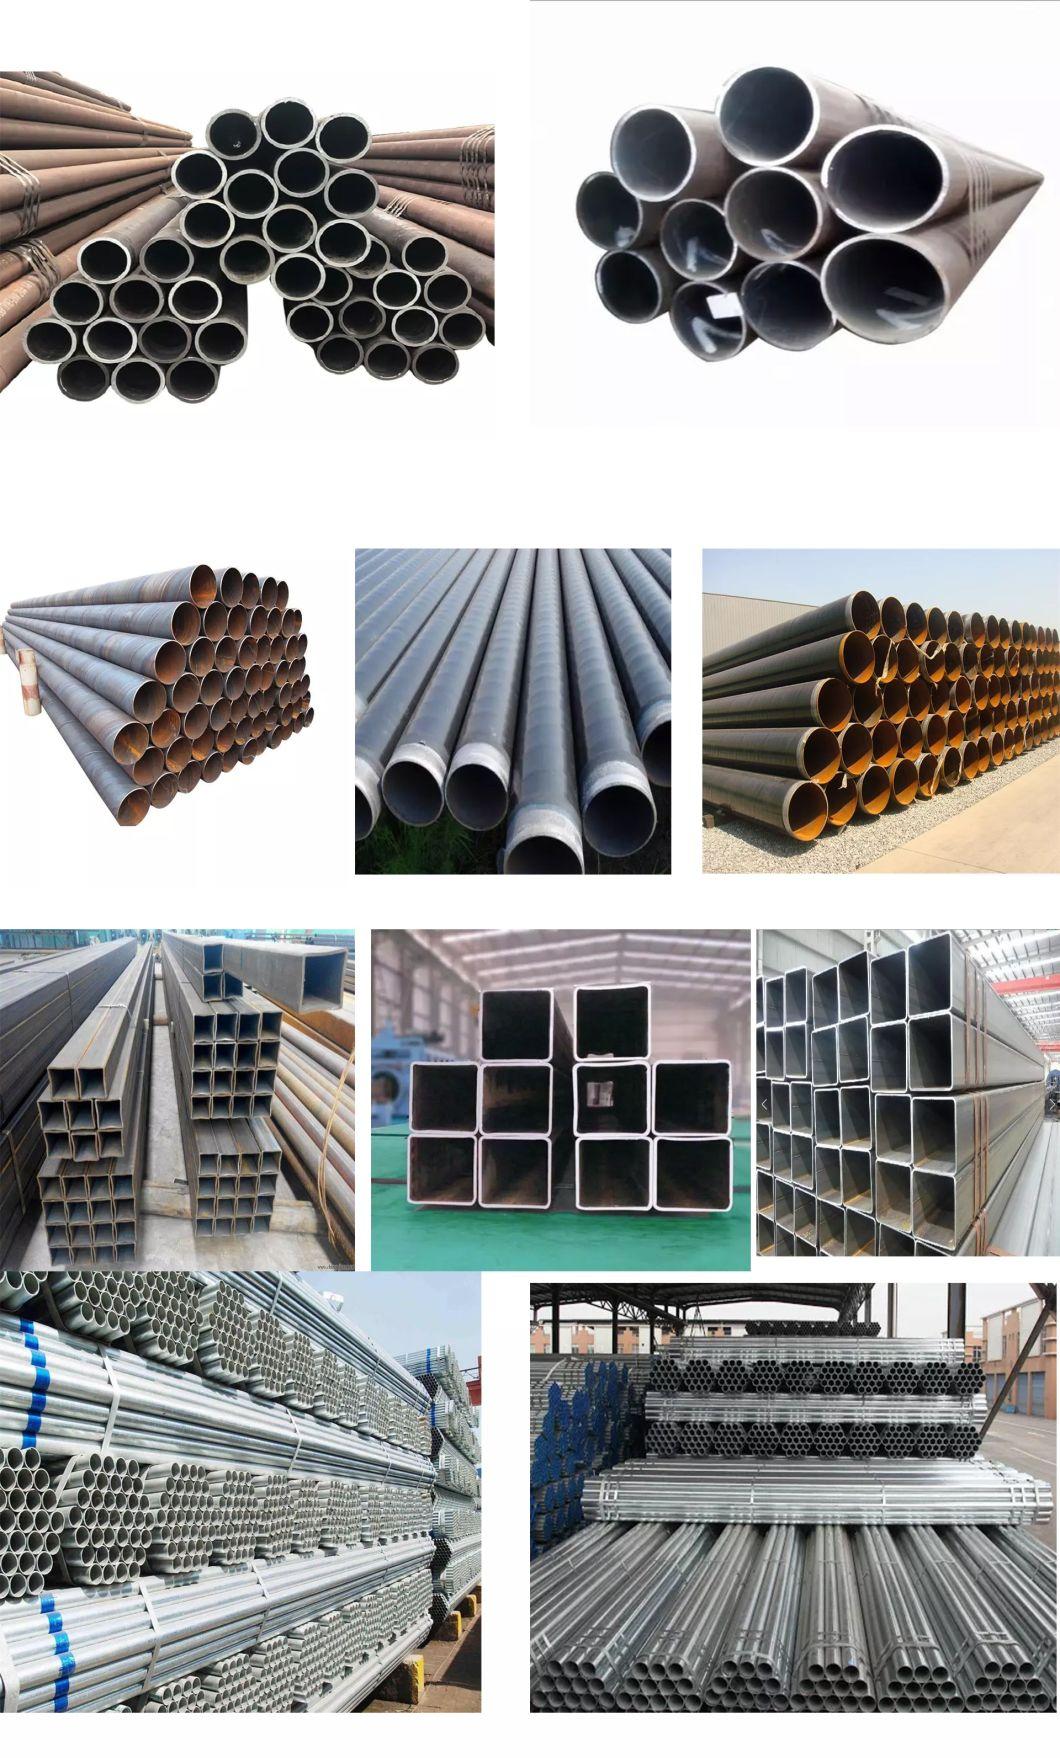 S45c Stress Relieved Q125 API Seamless Carbon Honed Steel Tubing Tube ASTM A179